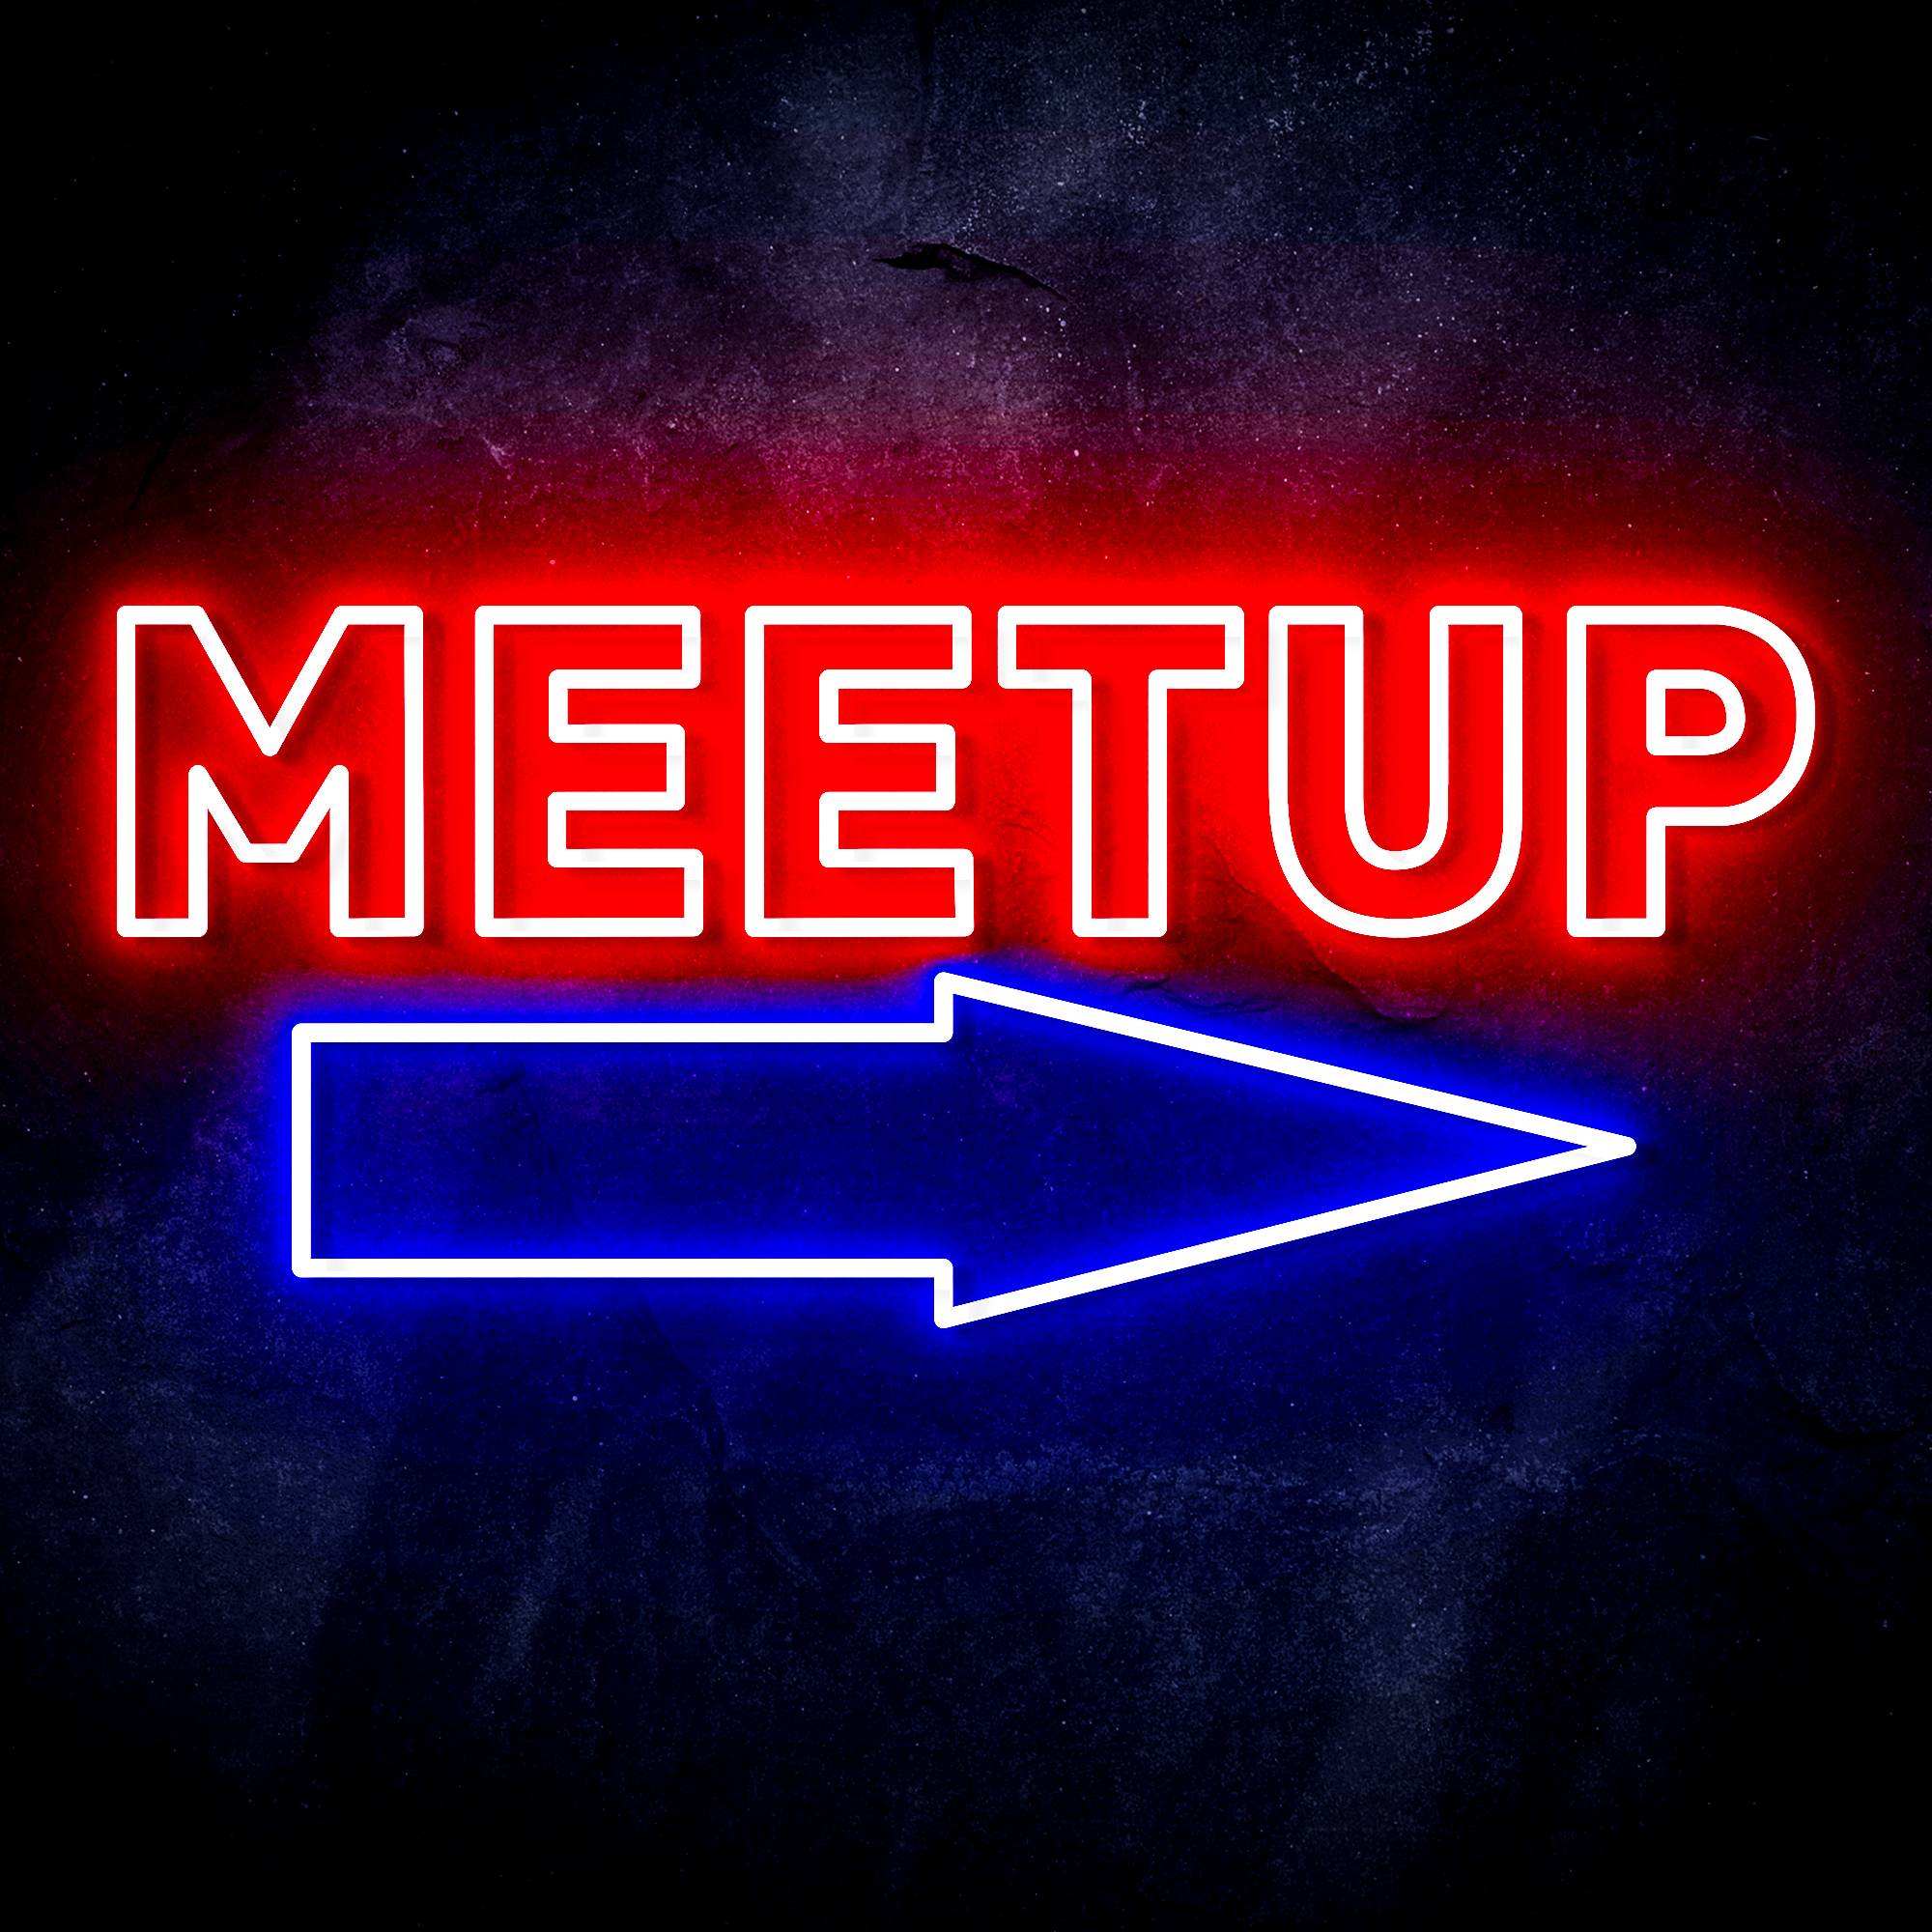 "MEETUP" with arrow LED Neon Sign